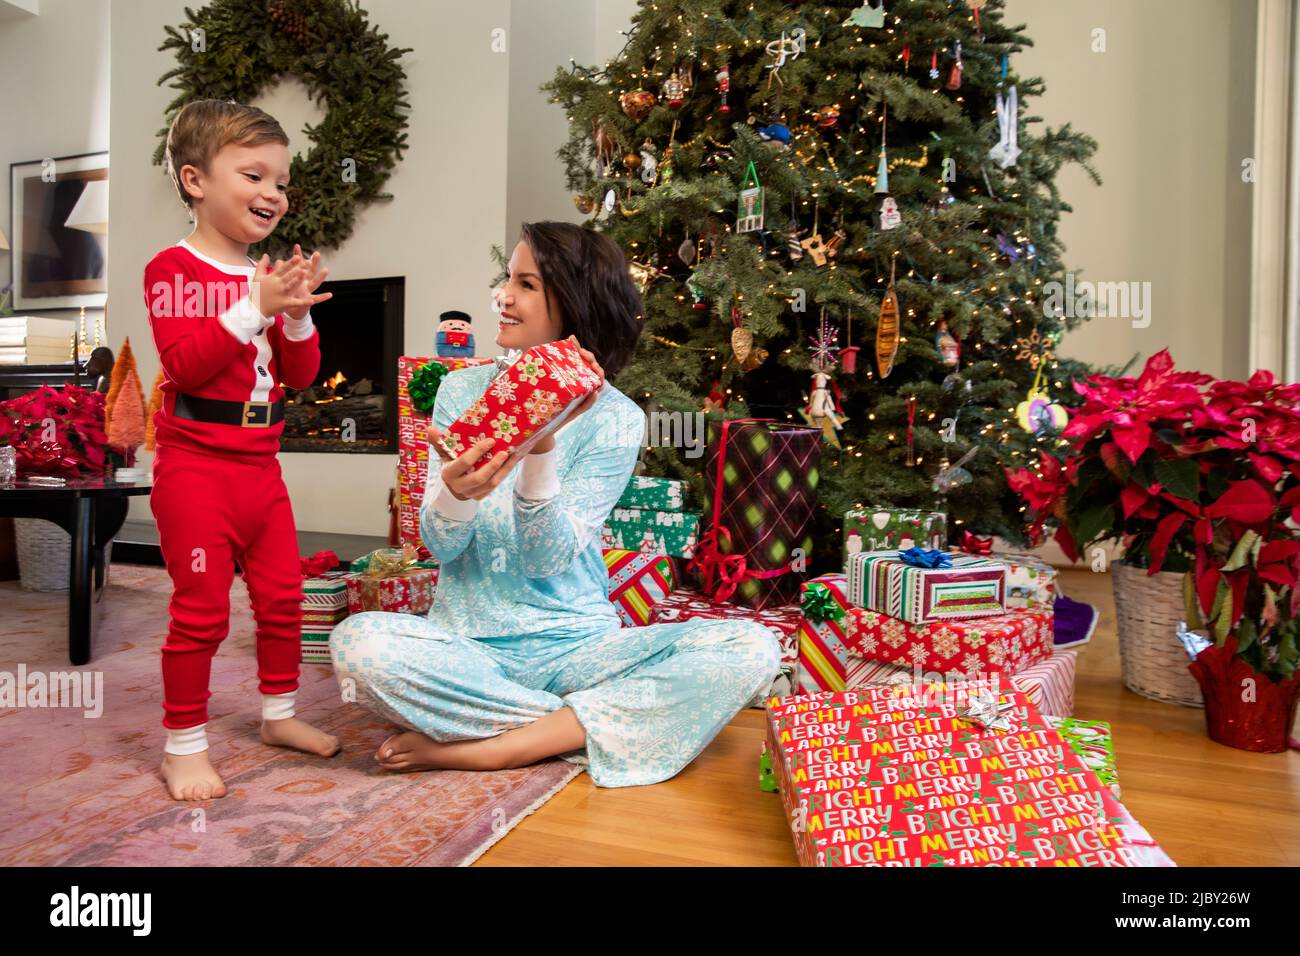 Boy in Santa pajamas clapping hands in excitement as mother hands him Christmas gift Stock Photo